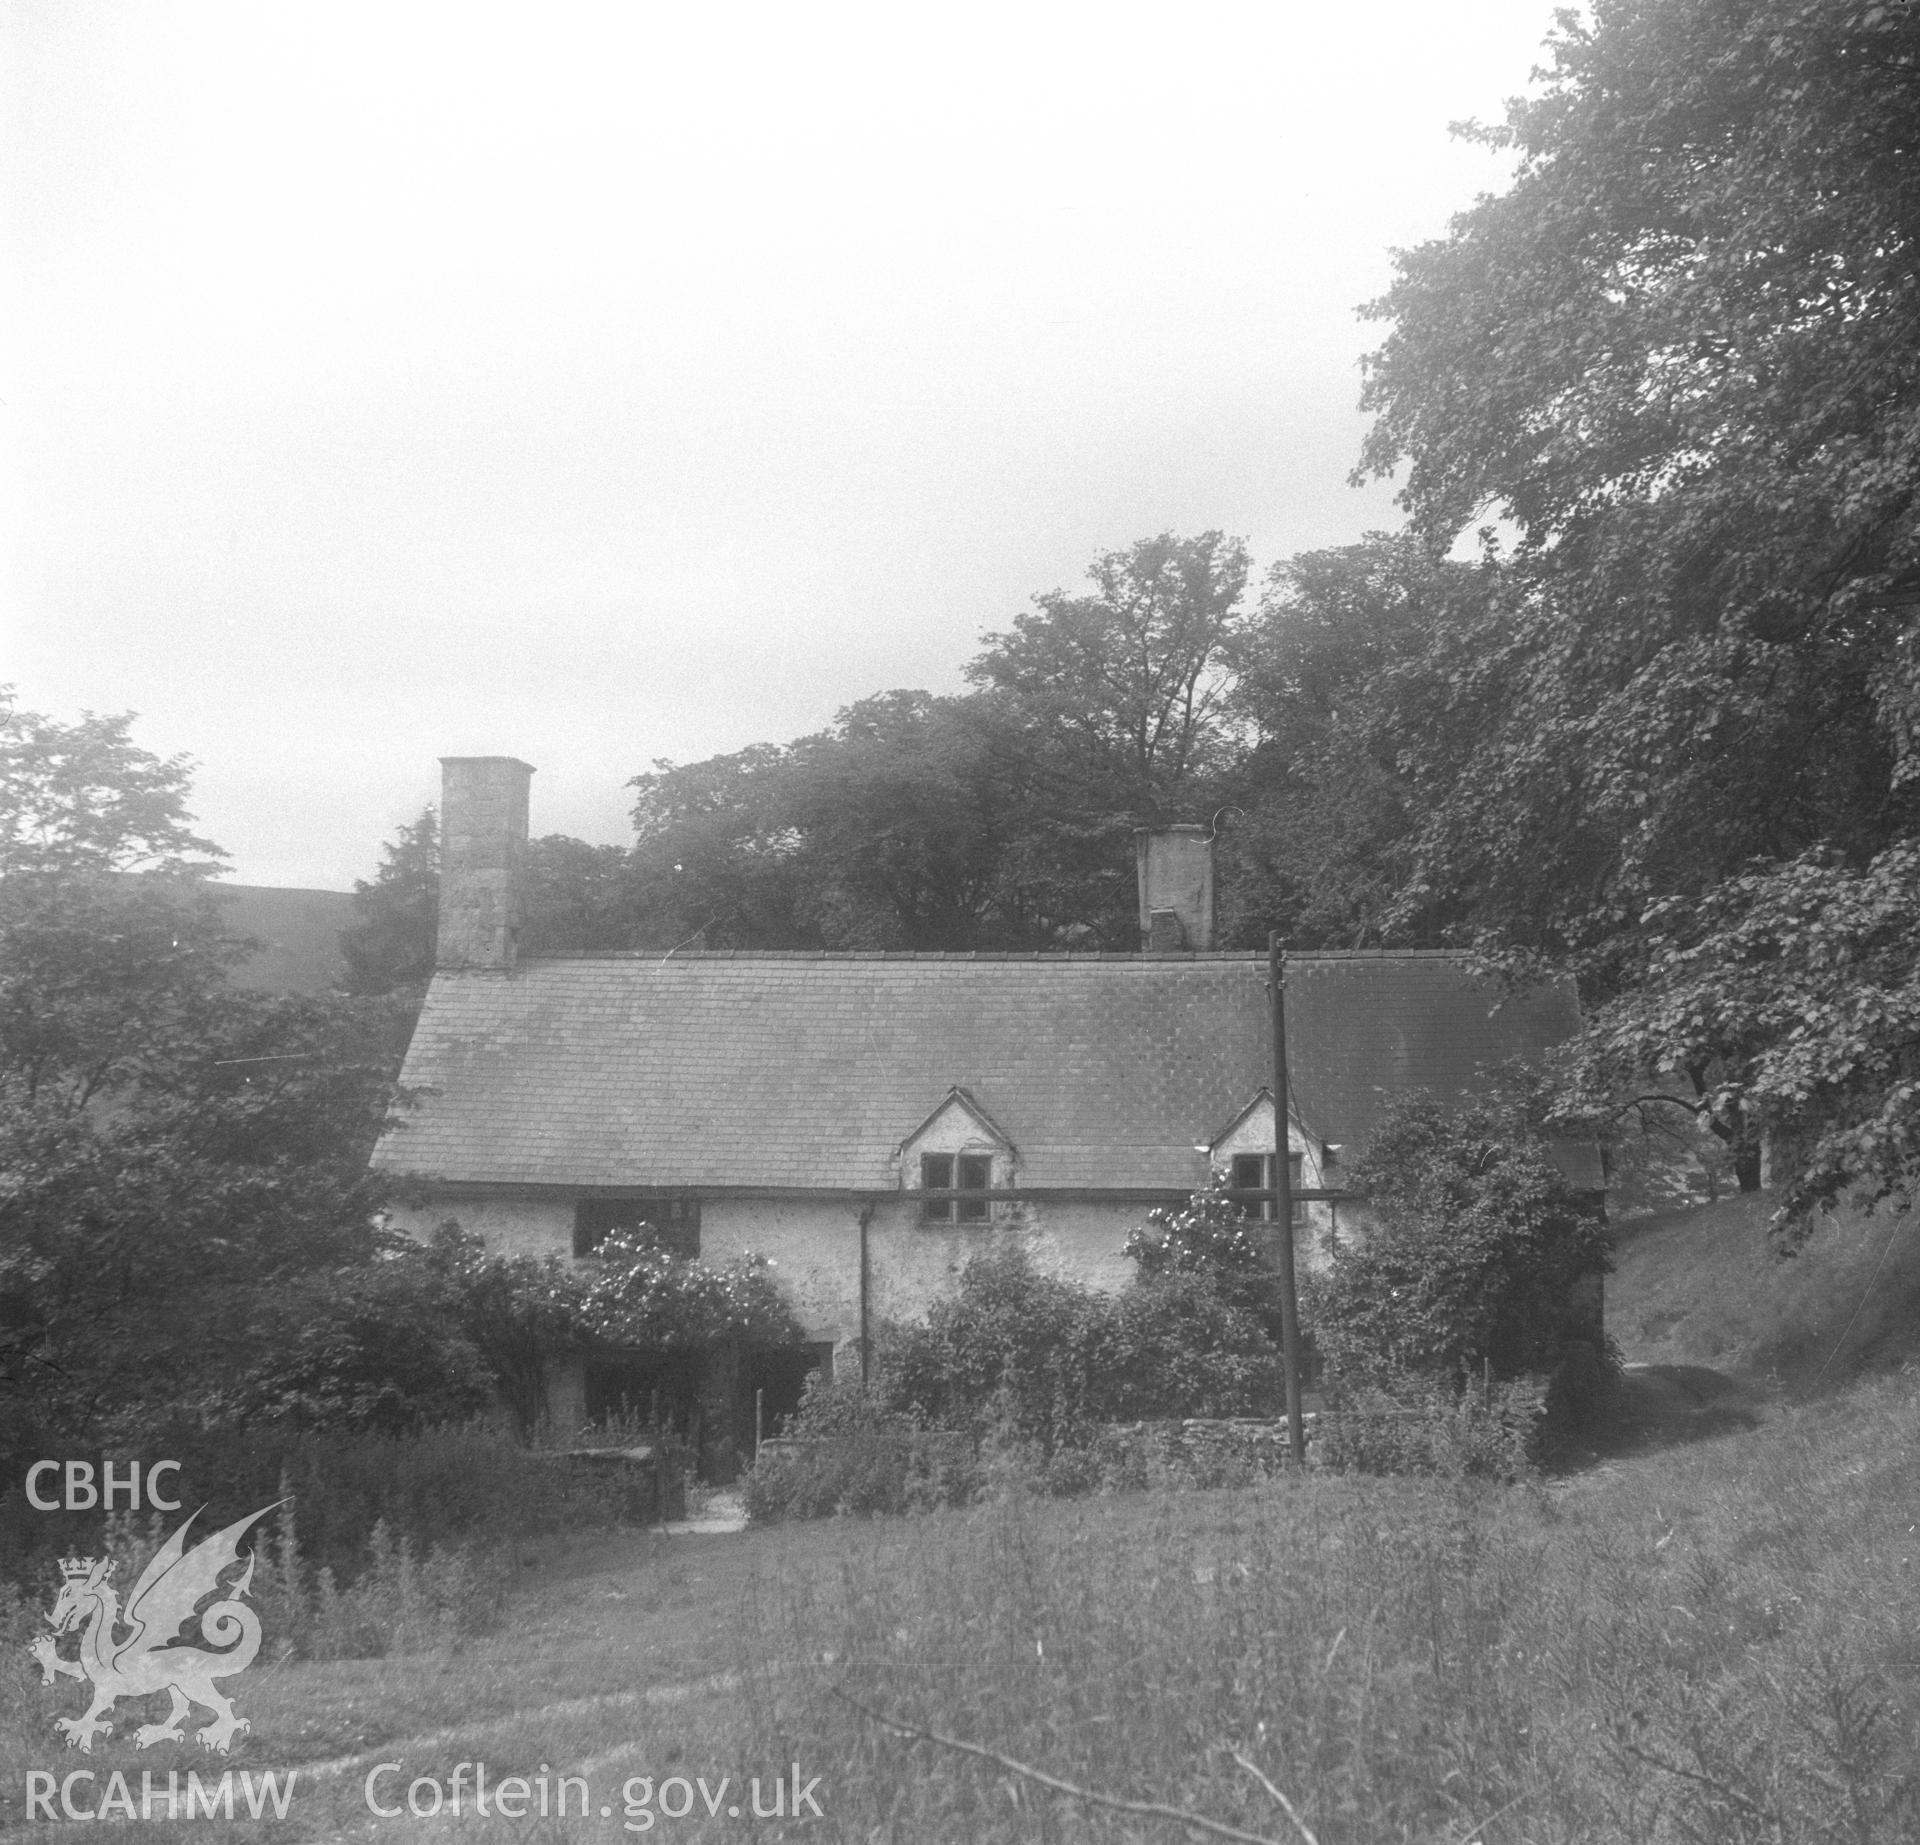 Black and white acetate negative showing exterior view from the grounds, Brithdir-Mawr, Cilcain.